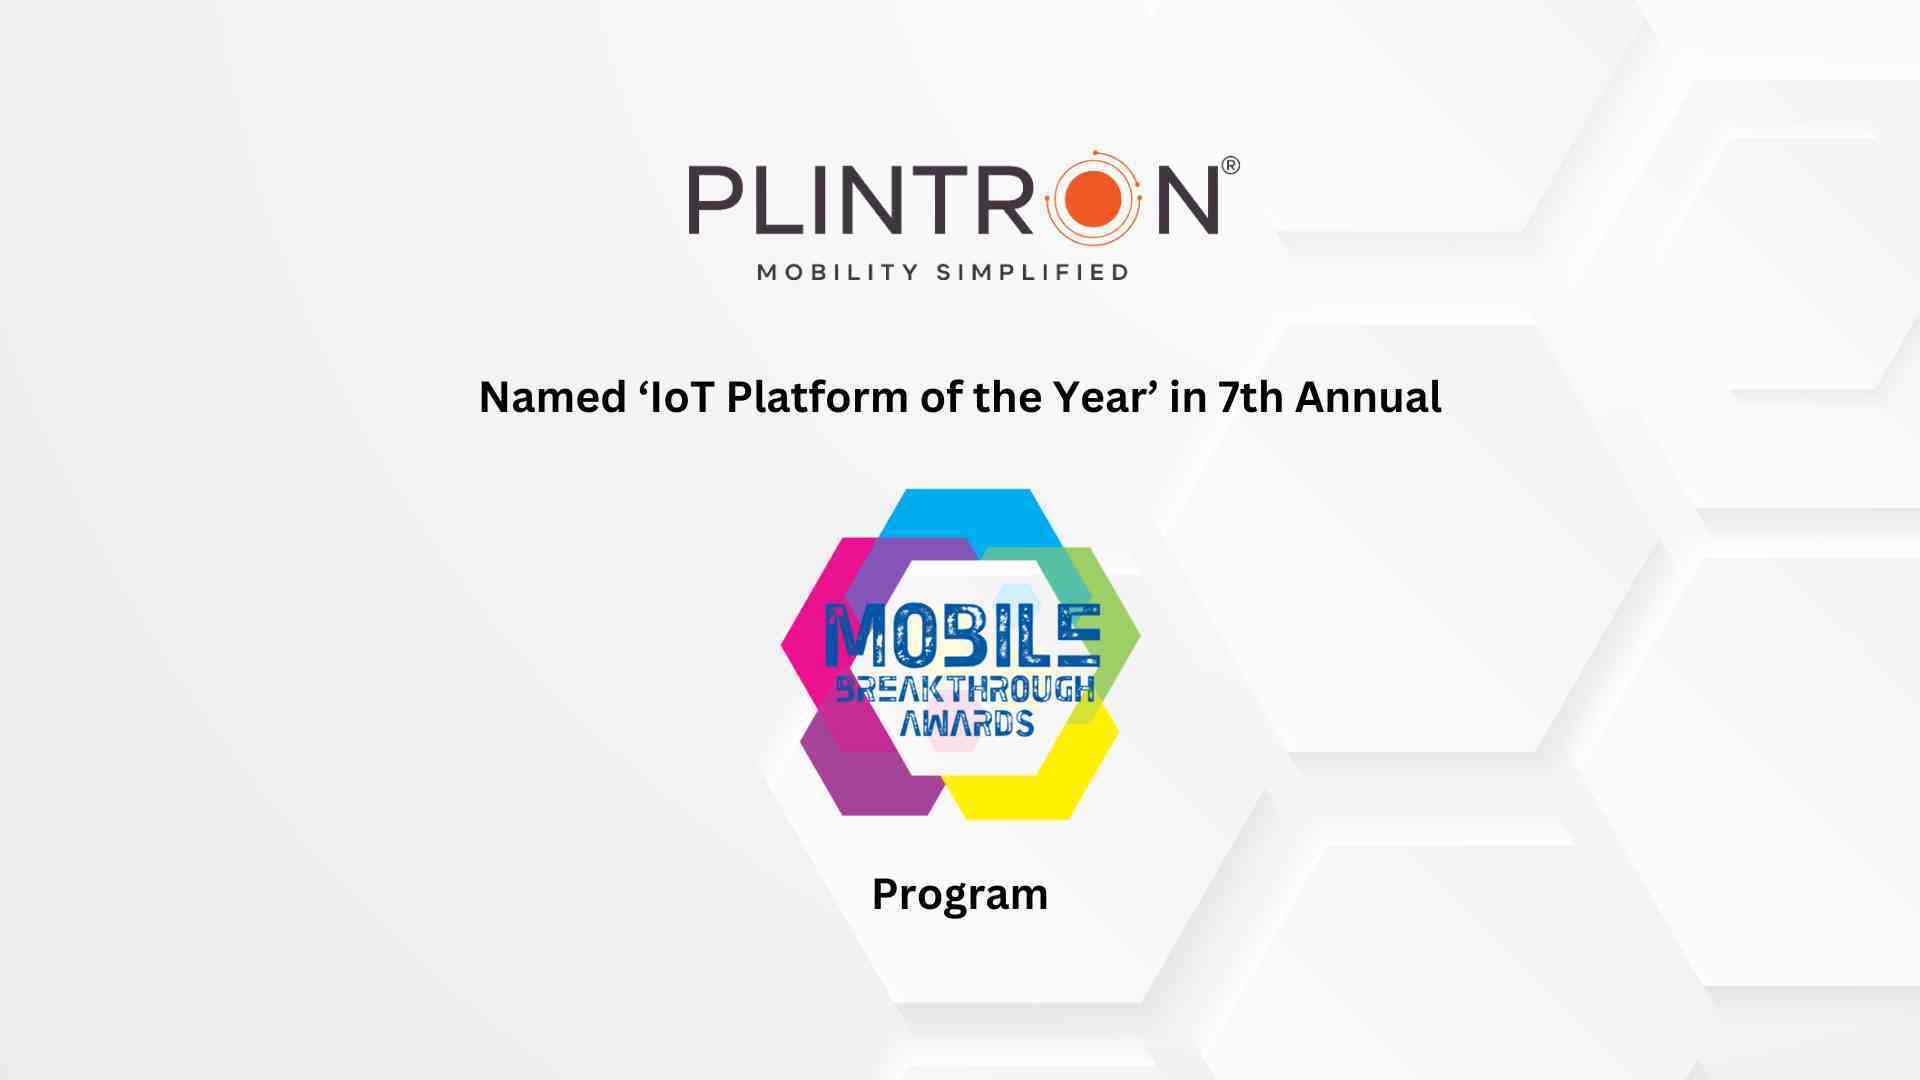 Plintron Named 'IoT Platform of the Year' in 7th Annual Mobile Breakthrough Awards Program